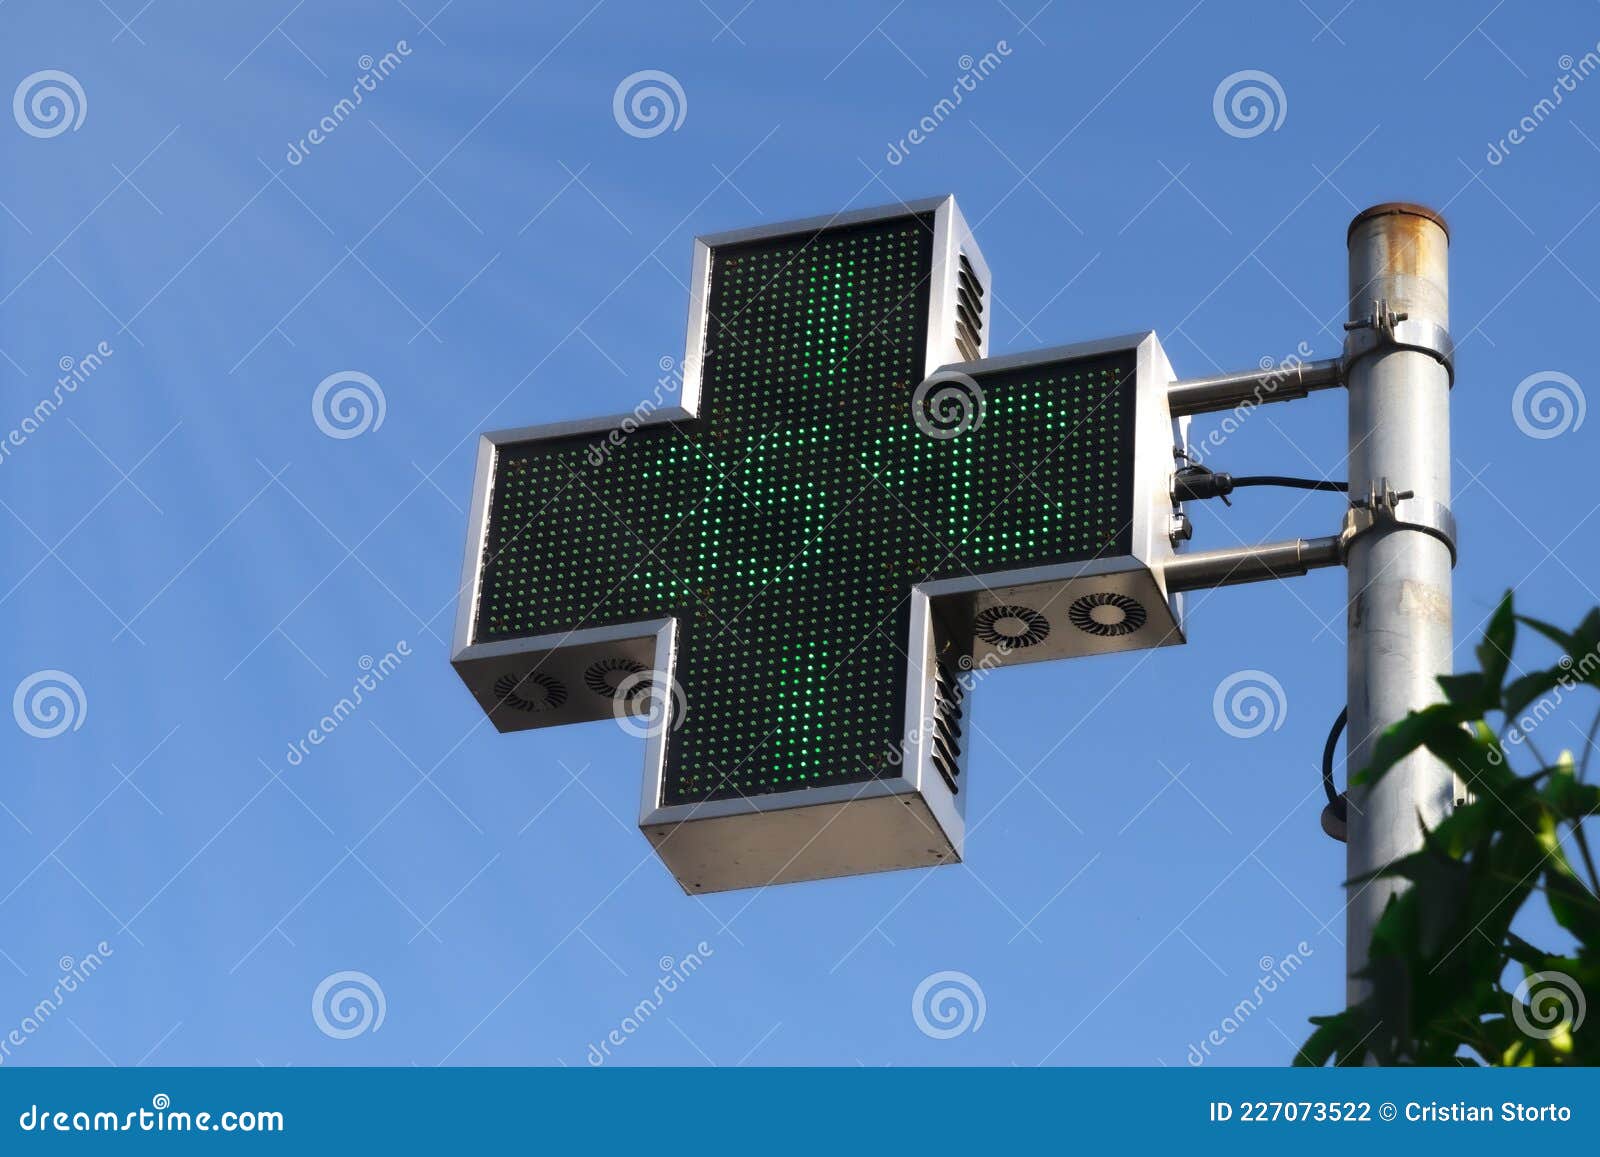 Pharmacy LED Panel Shows a Temperature of 35 Degrees Celsius